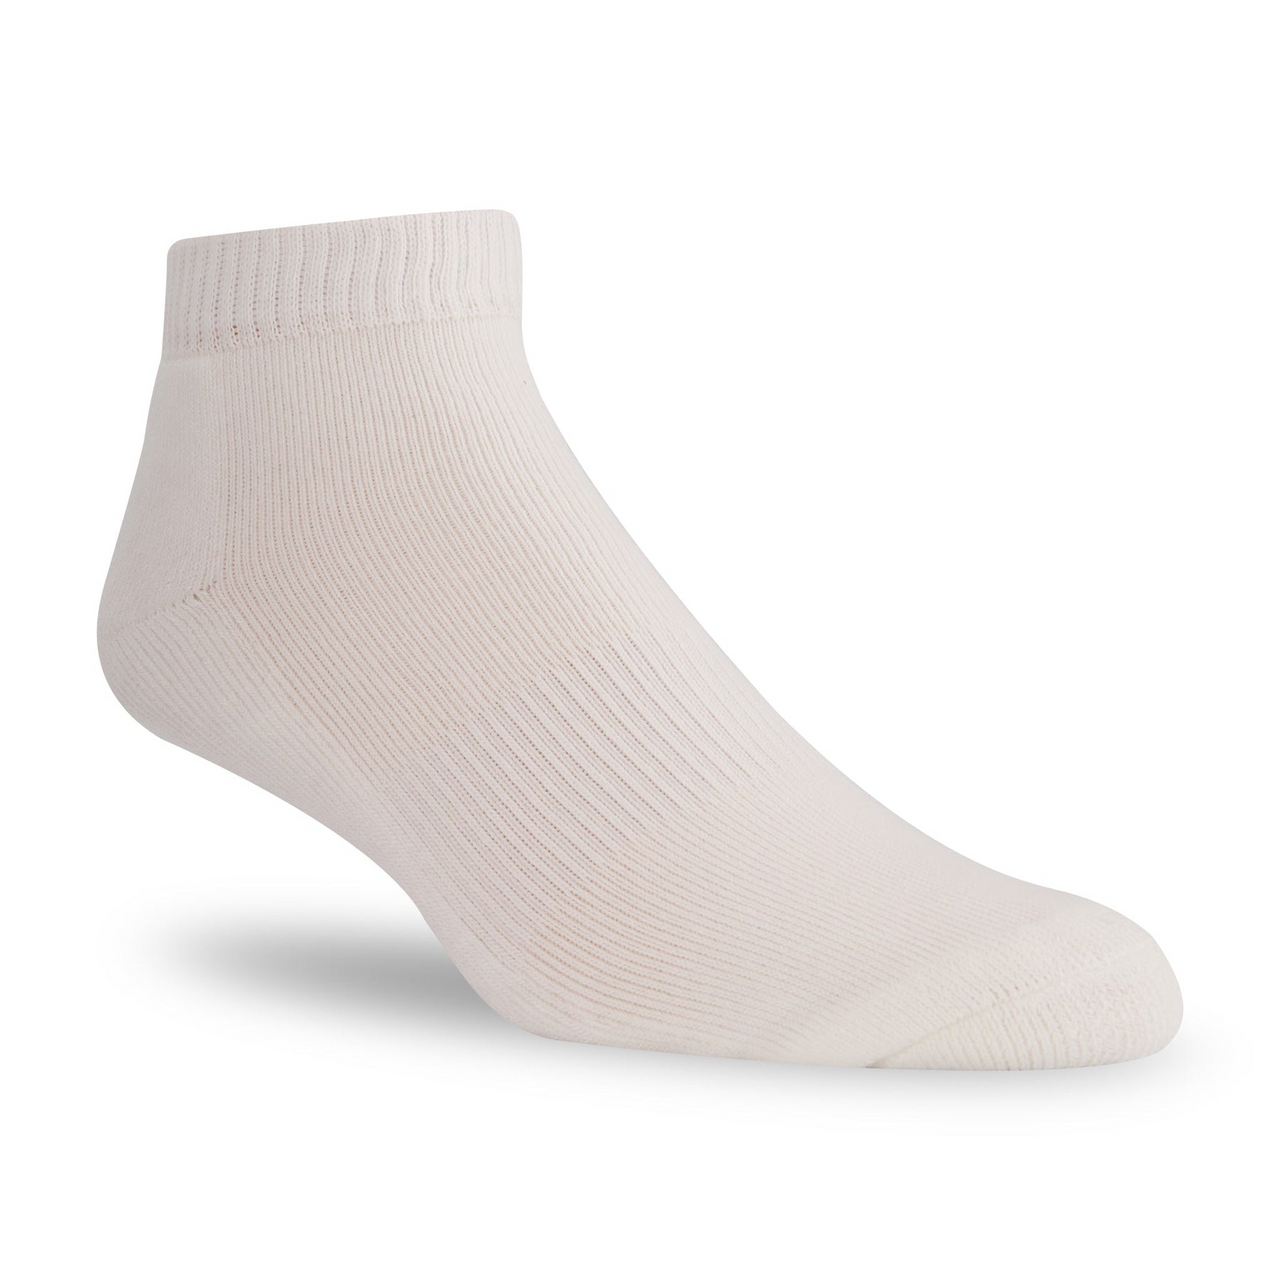 The Great Canadian Sox J.B. Field's Athletic "Bamboo Cushion" Low-Cut Ankle Socks